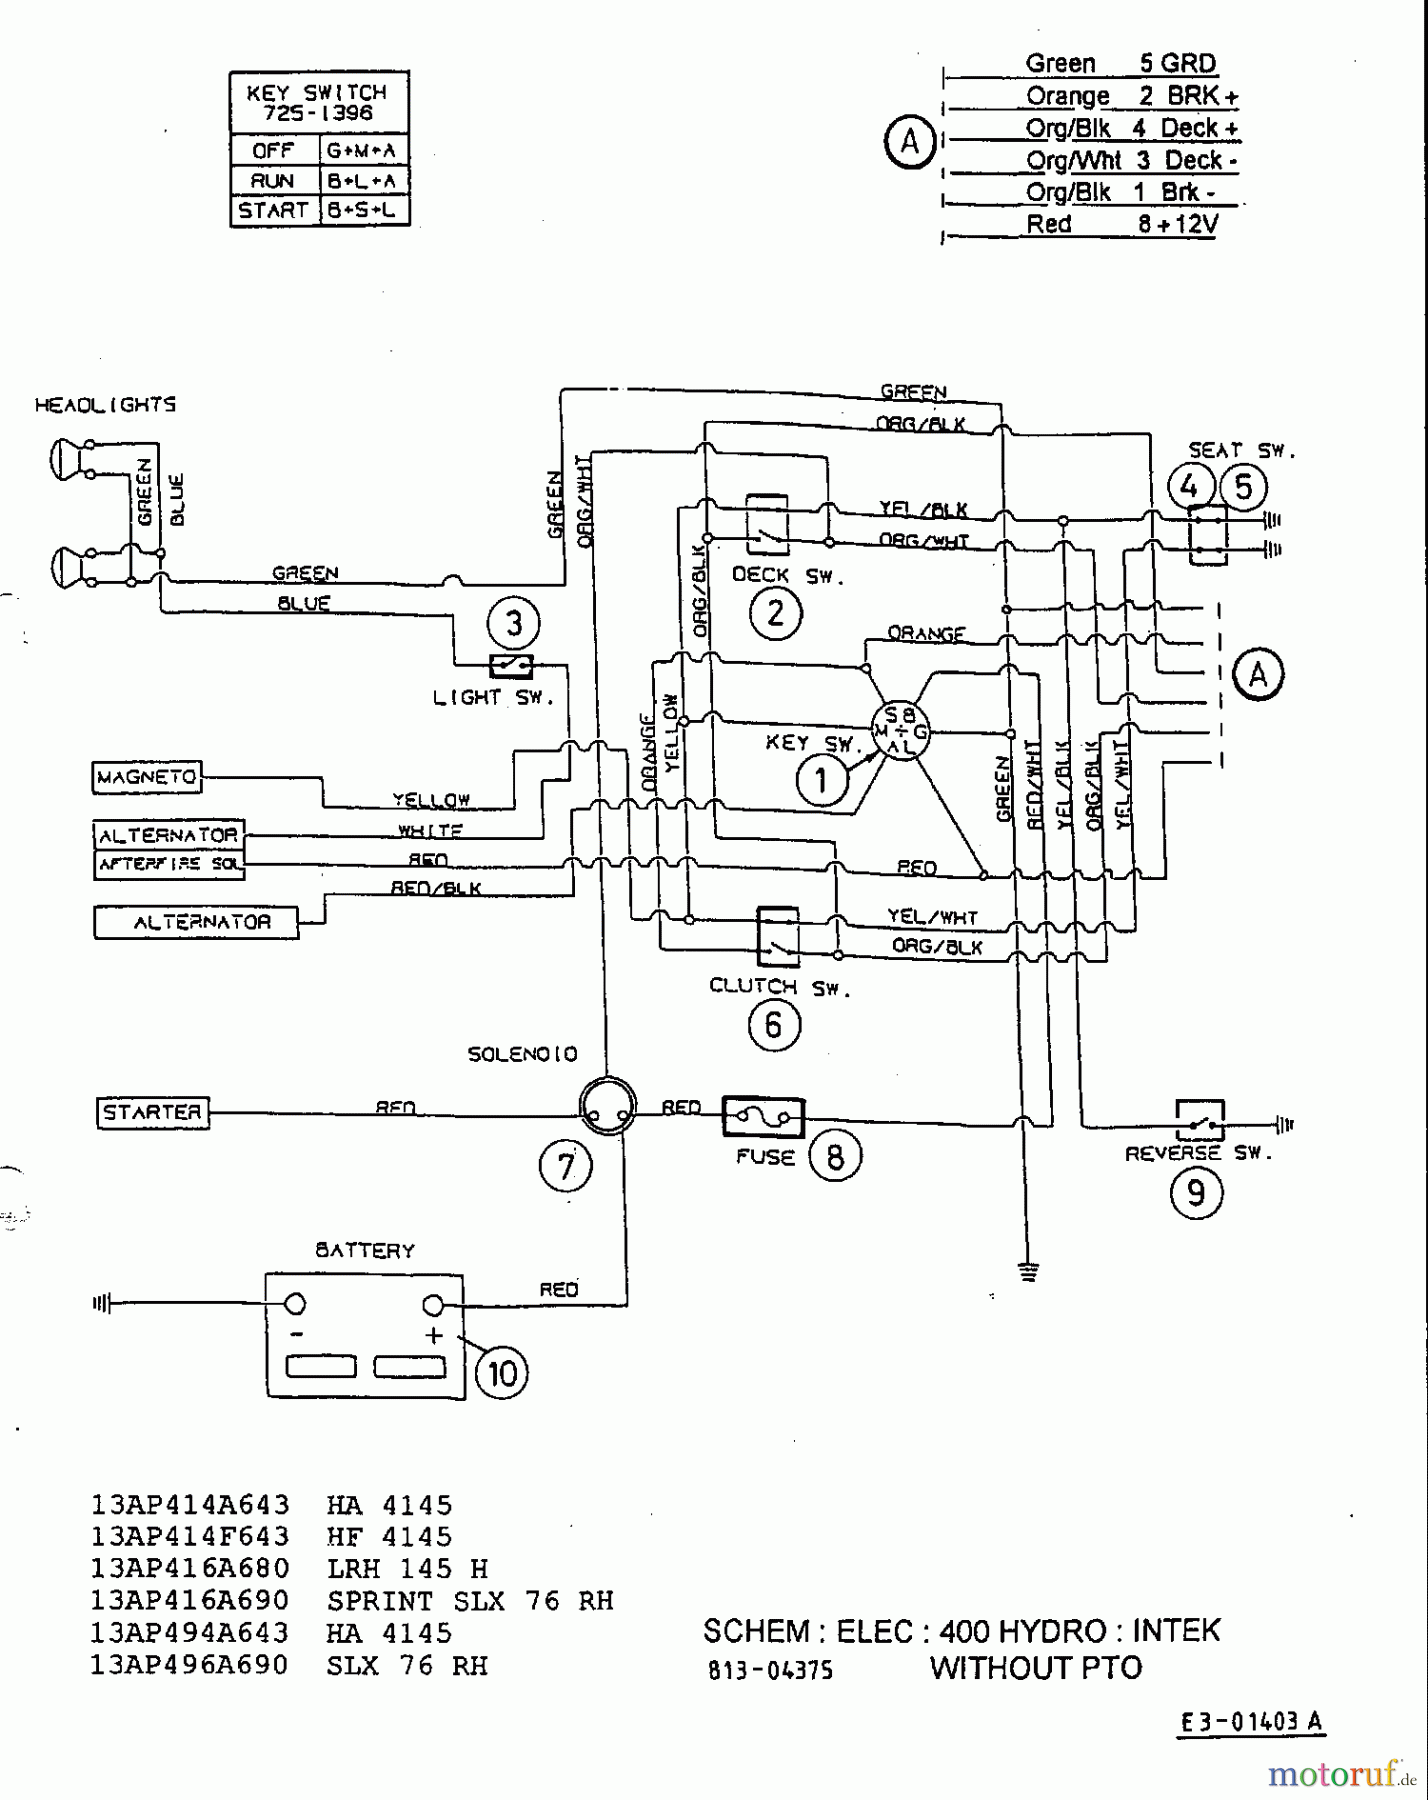  Mastercut Lawn tractors 13/92 H 13AA410E659  (2000) Wiring diagram Intek without electric clutch